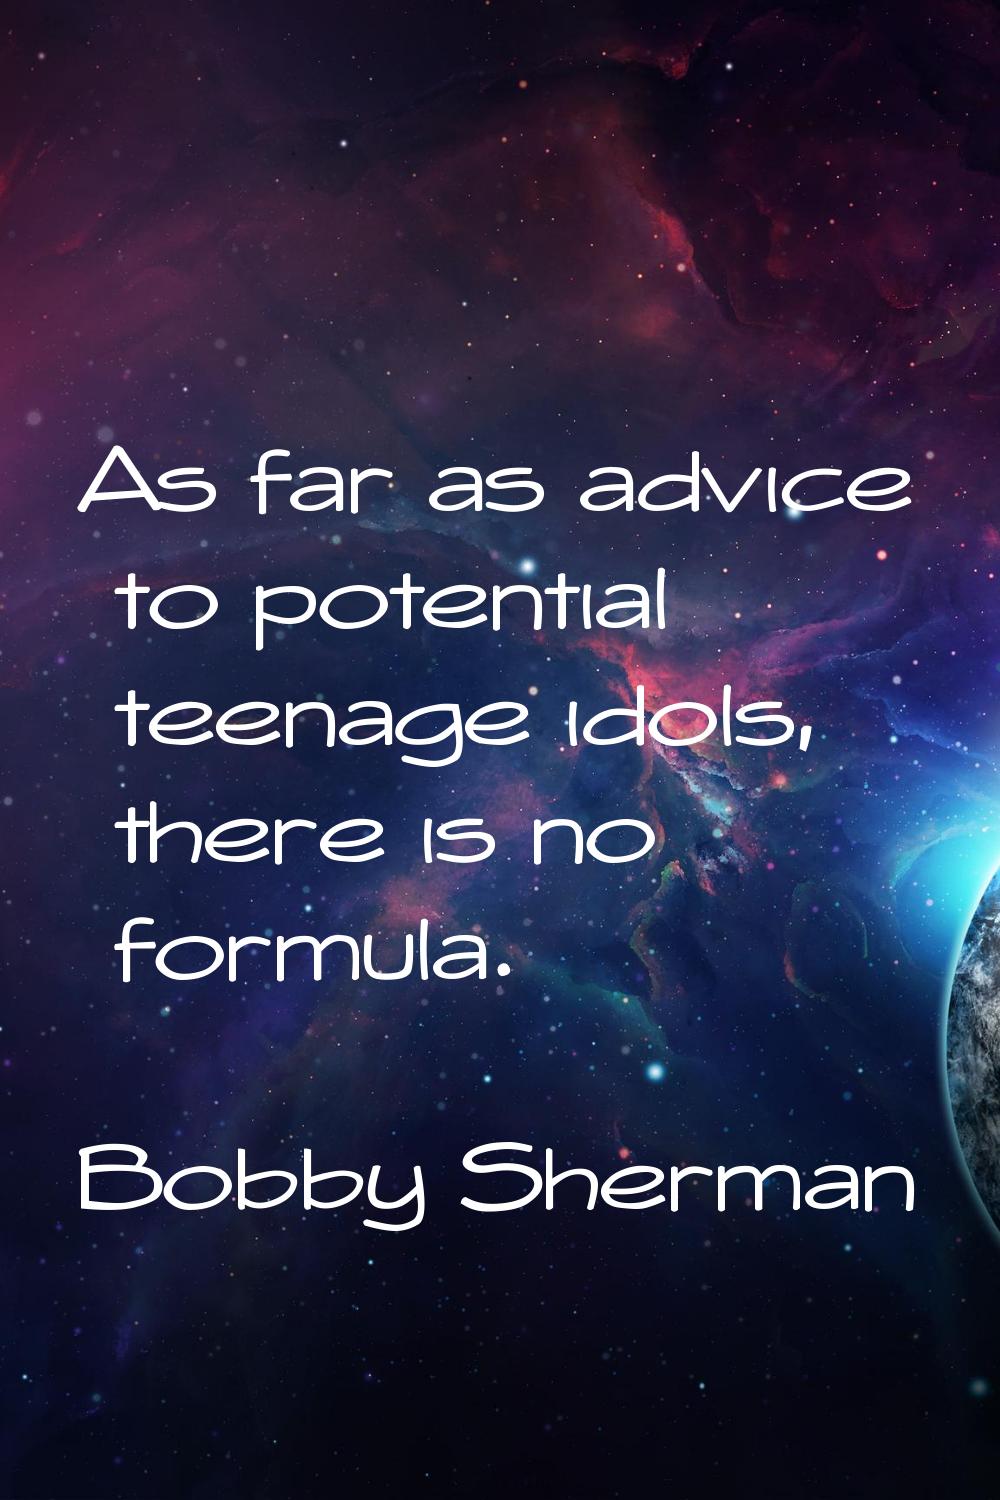 As far as advice to potential teenage idols, there is no formula.